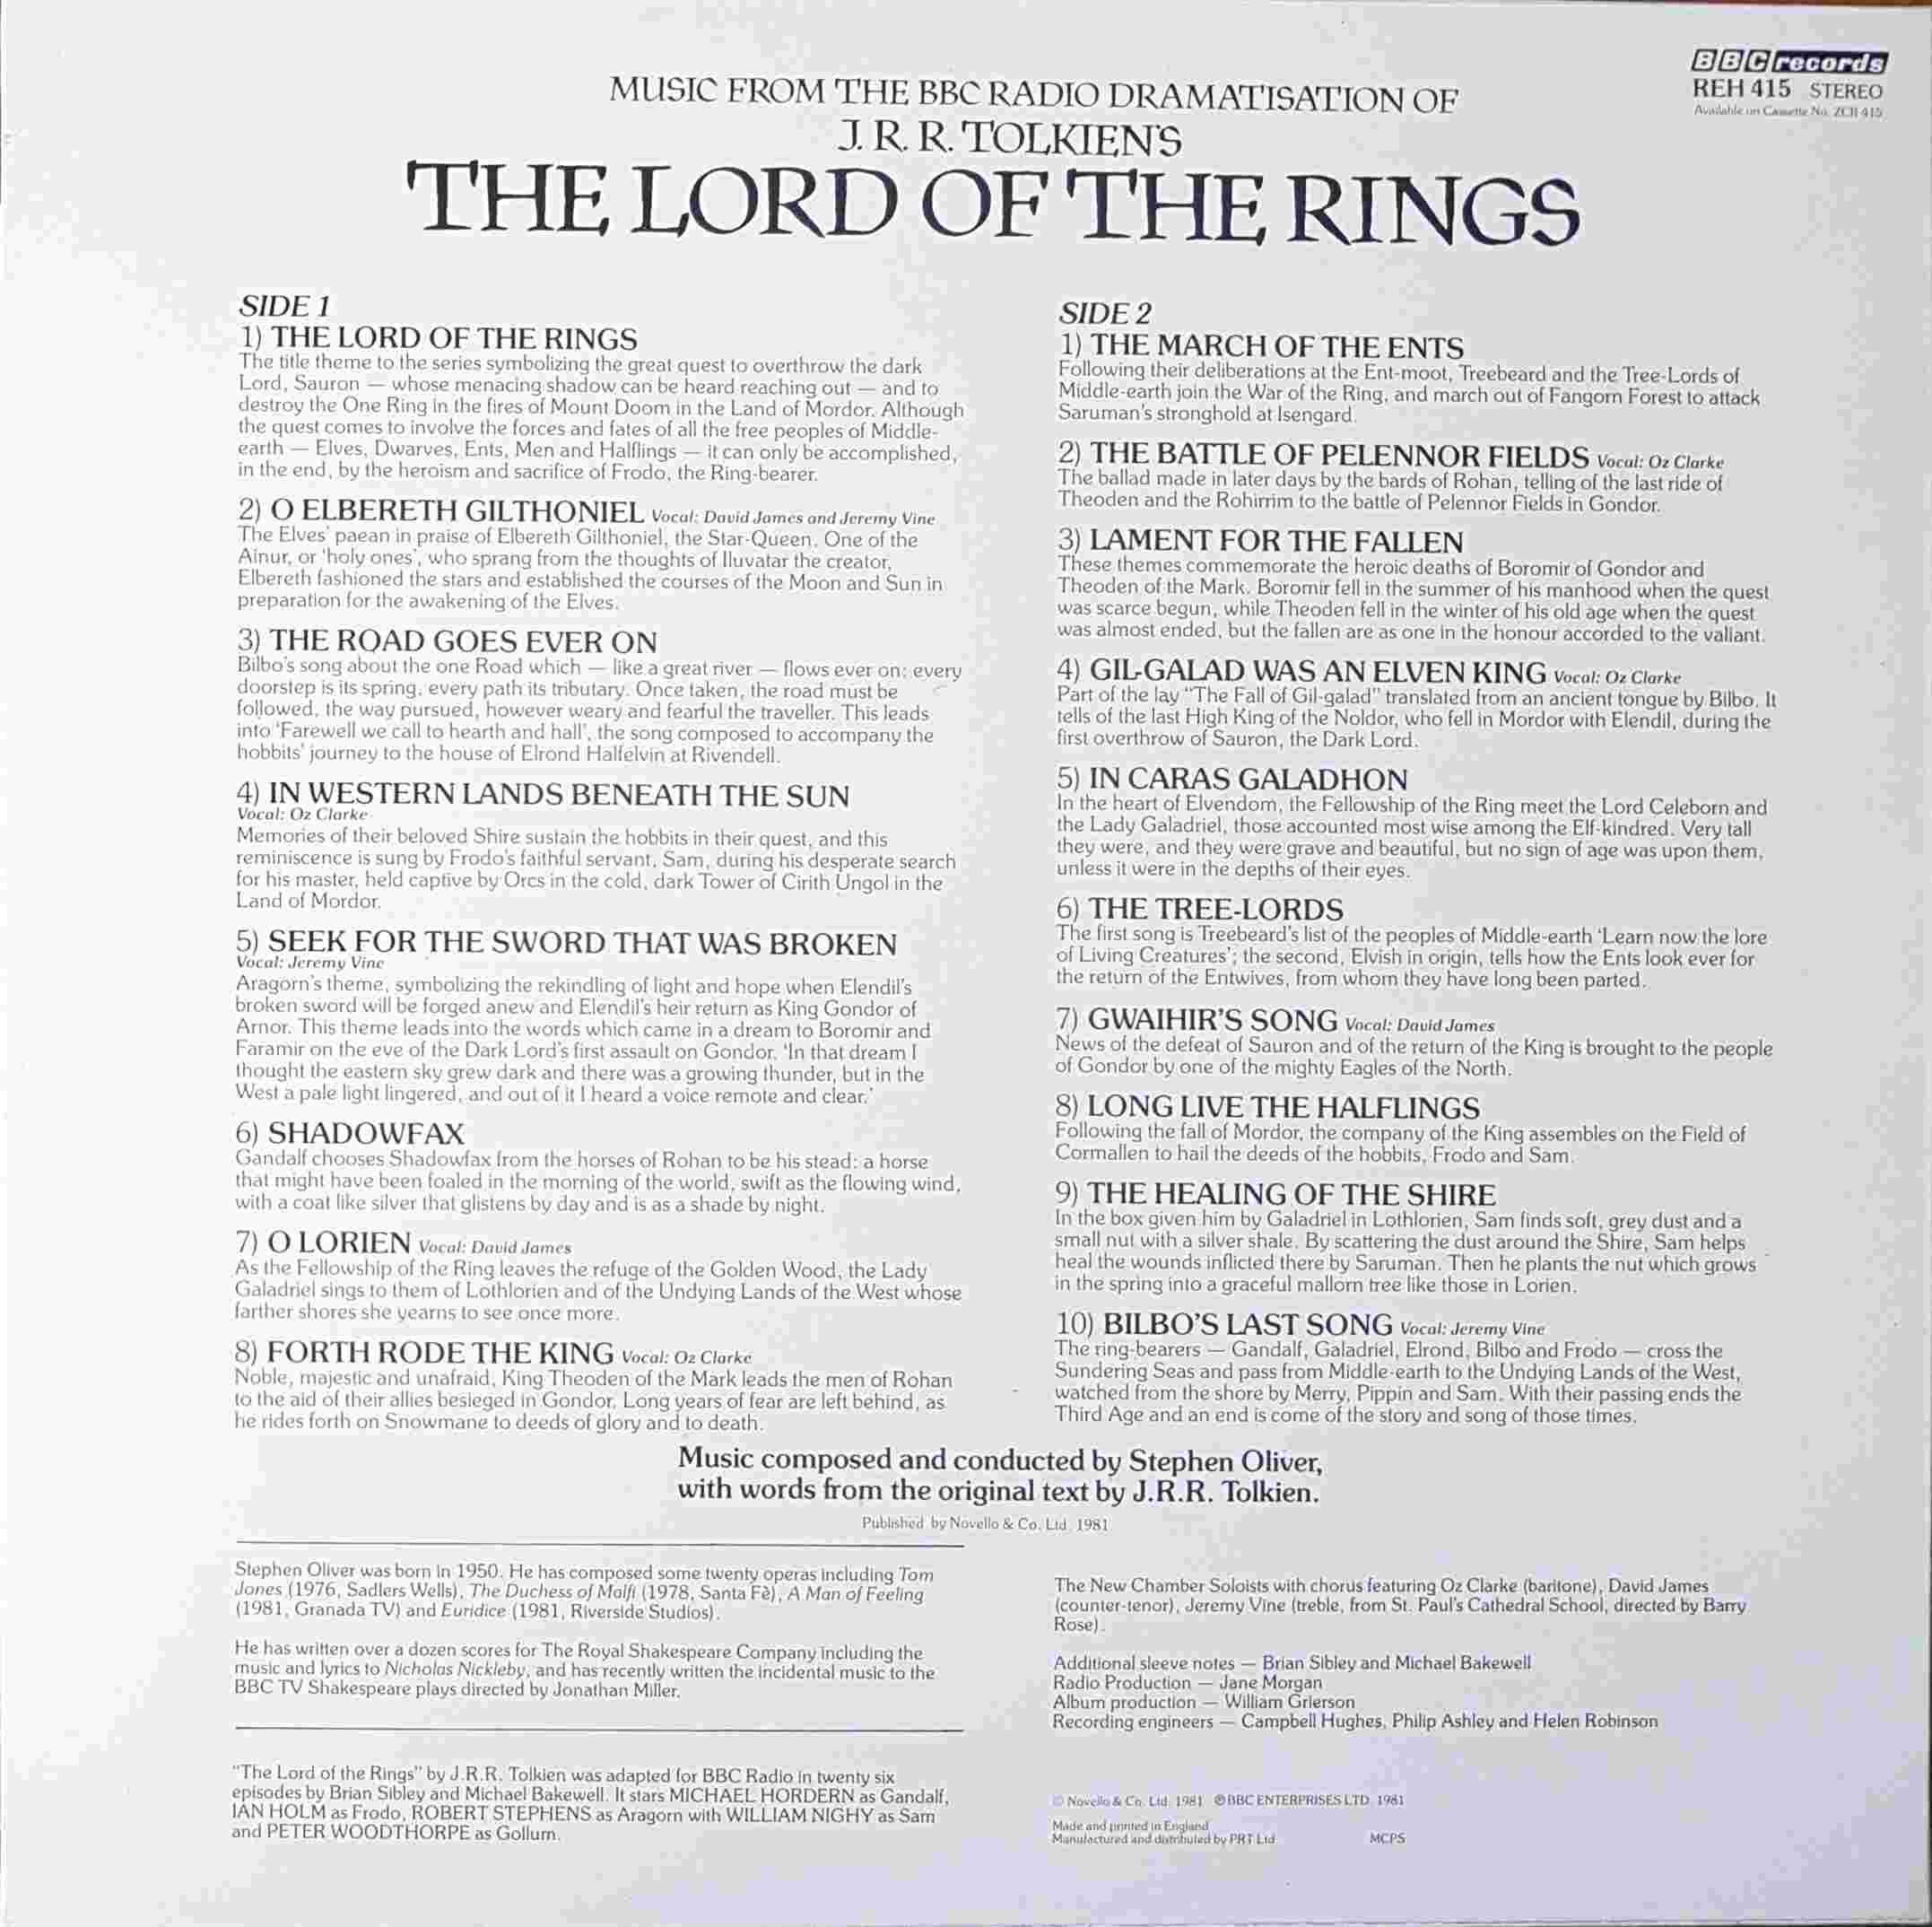 Picture of REH 415 The lord of the rings by artist Stephen Oliver from the BBC records and Tapes library